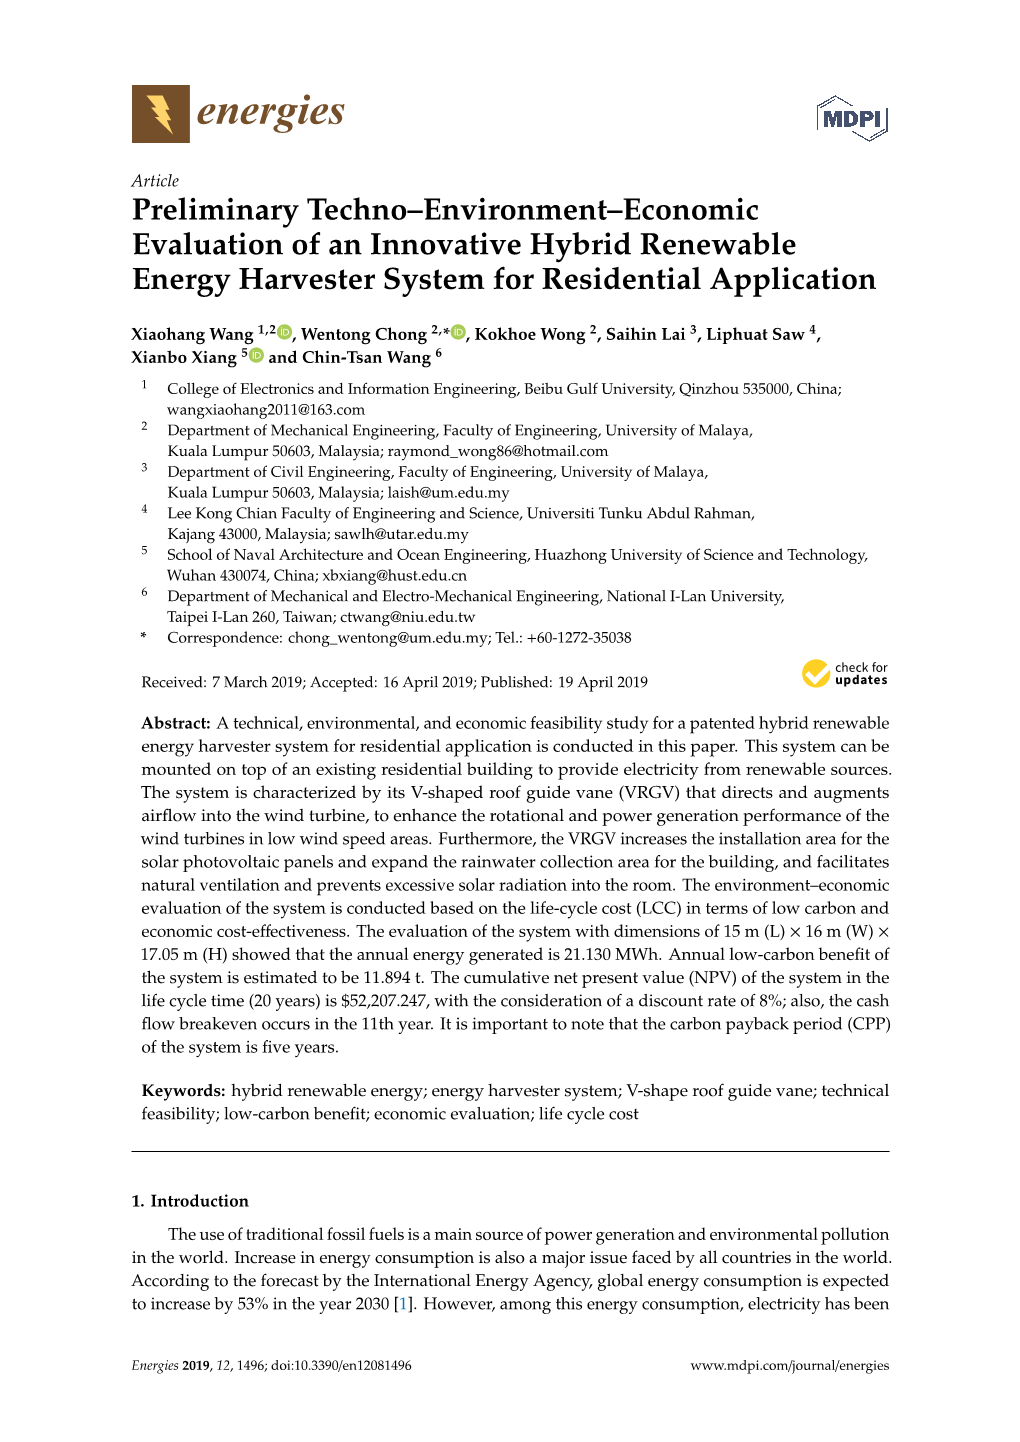 Preliminary Techno–Environment–Economic Evaluation of an Innovative Hybrid Renewable Energy Harvester System for Residential Application